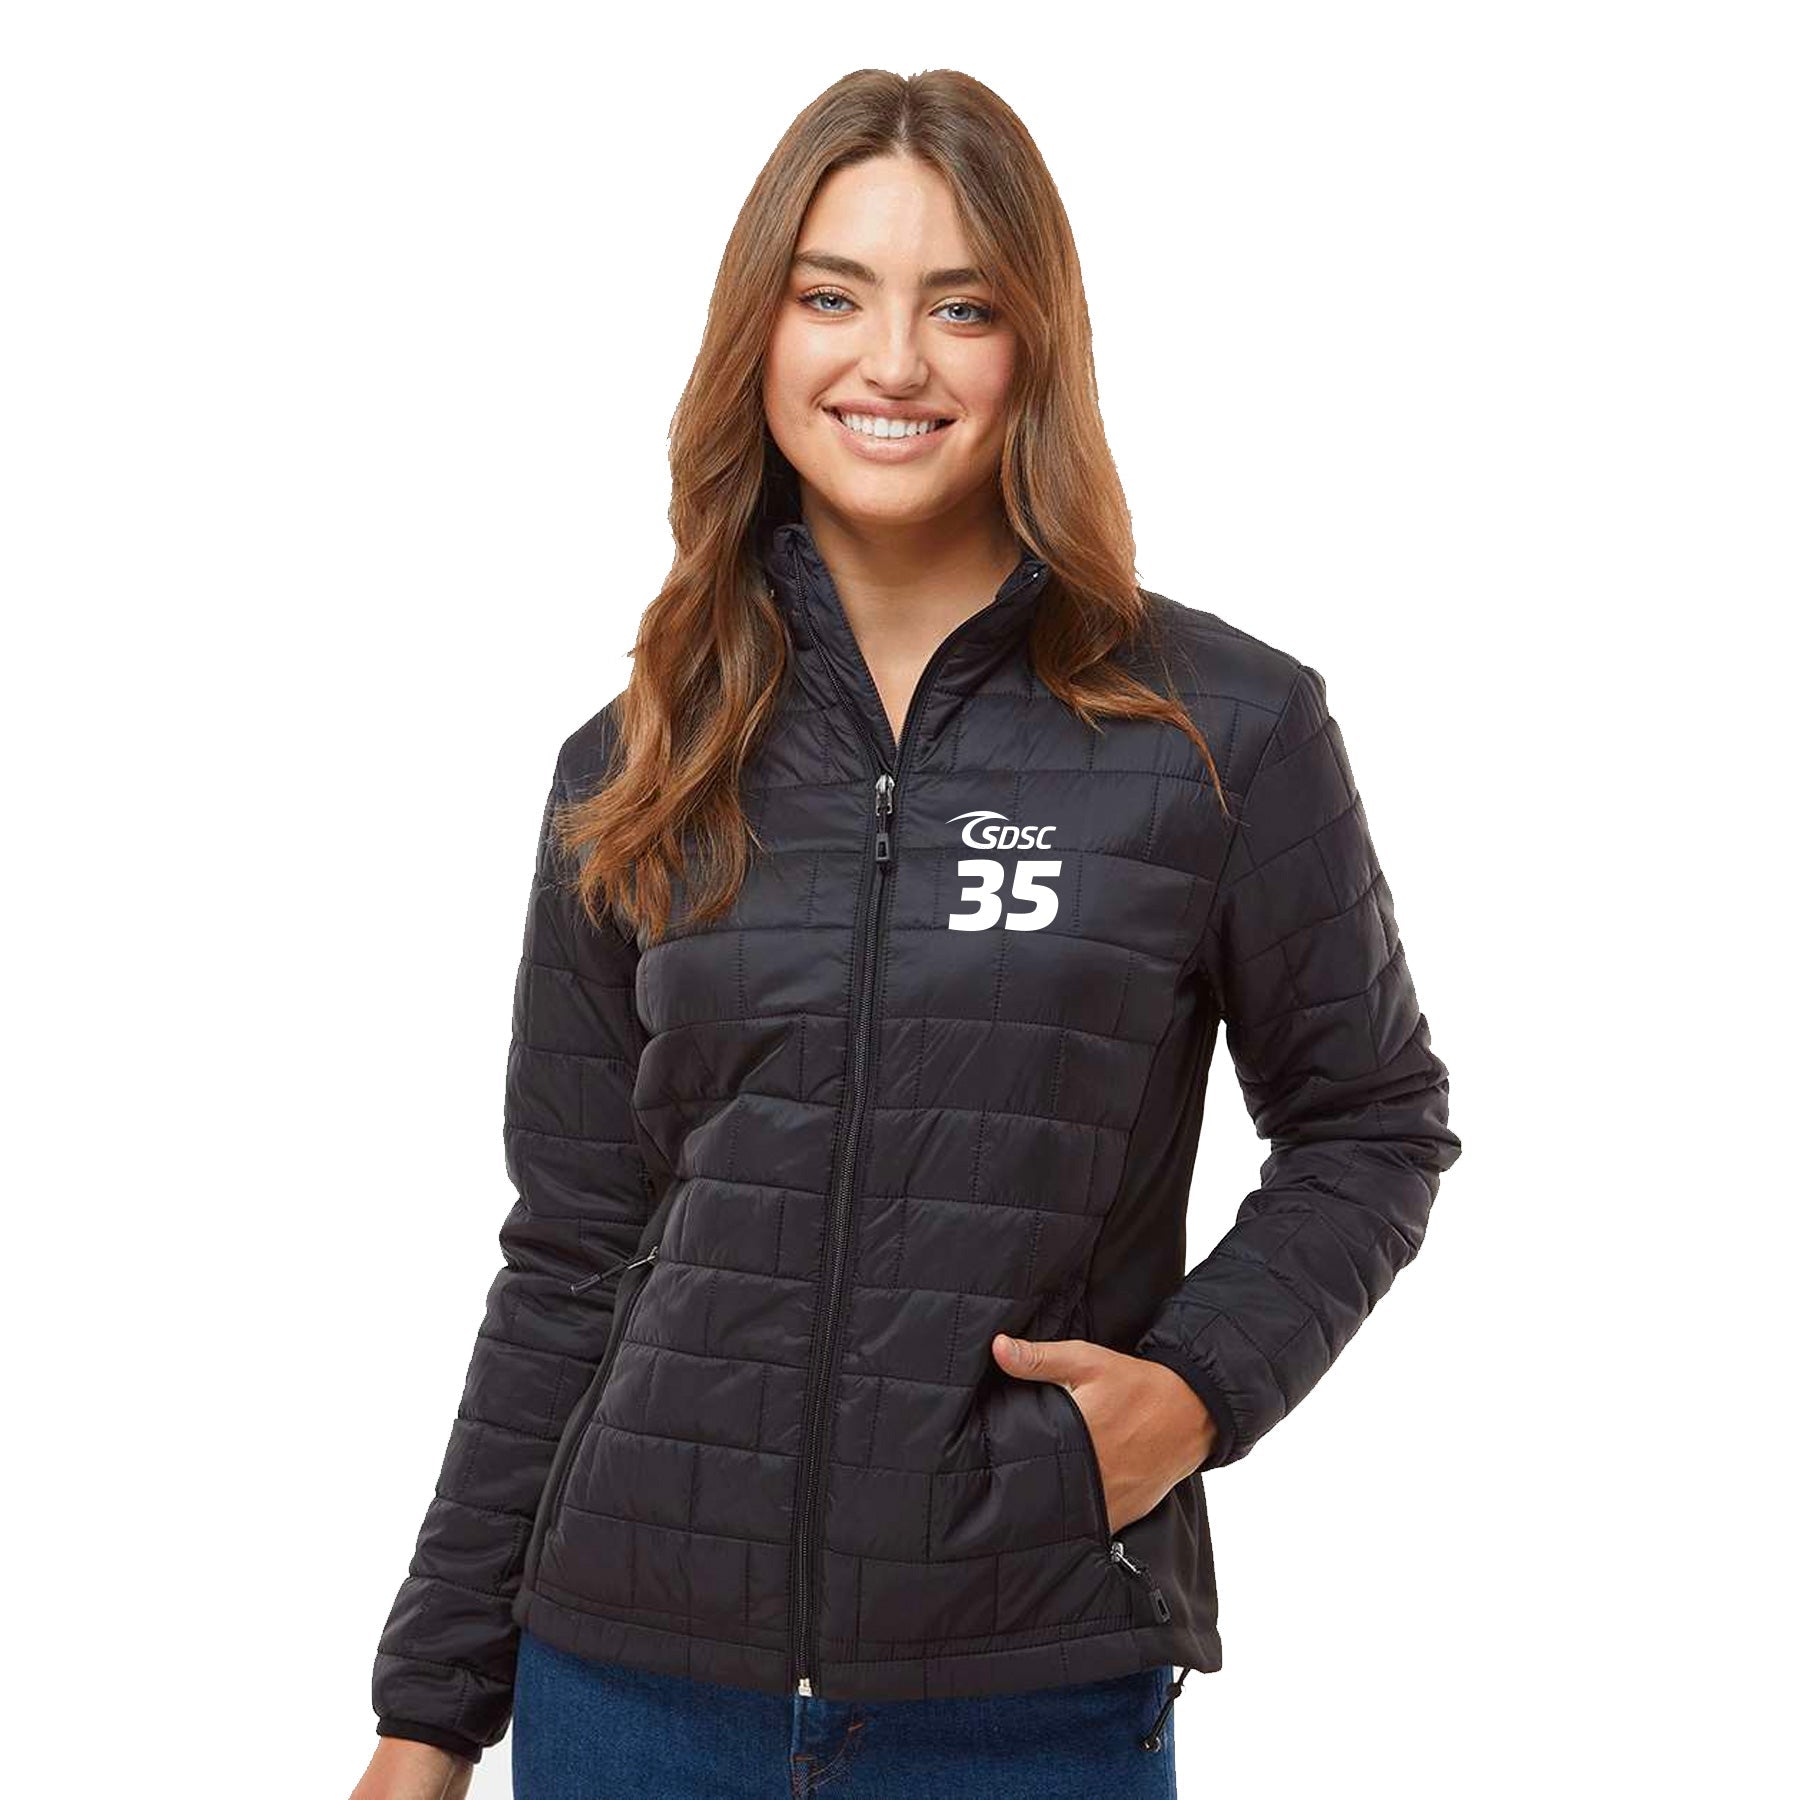 SDSC LOGO WITH NUMBER ELEMENT PUFFER JACKET